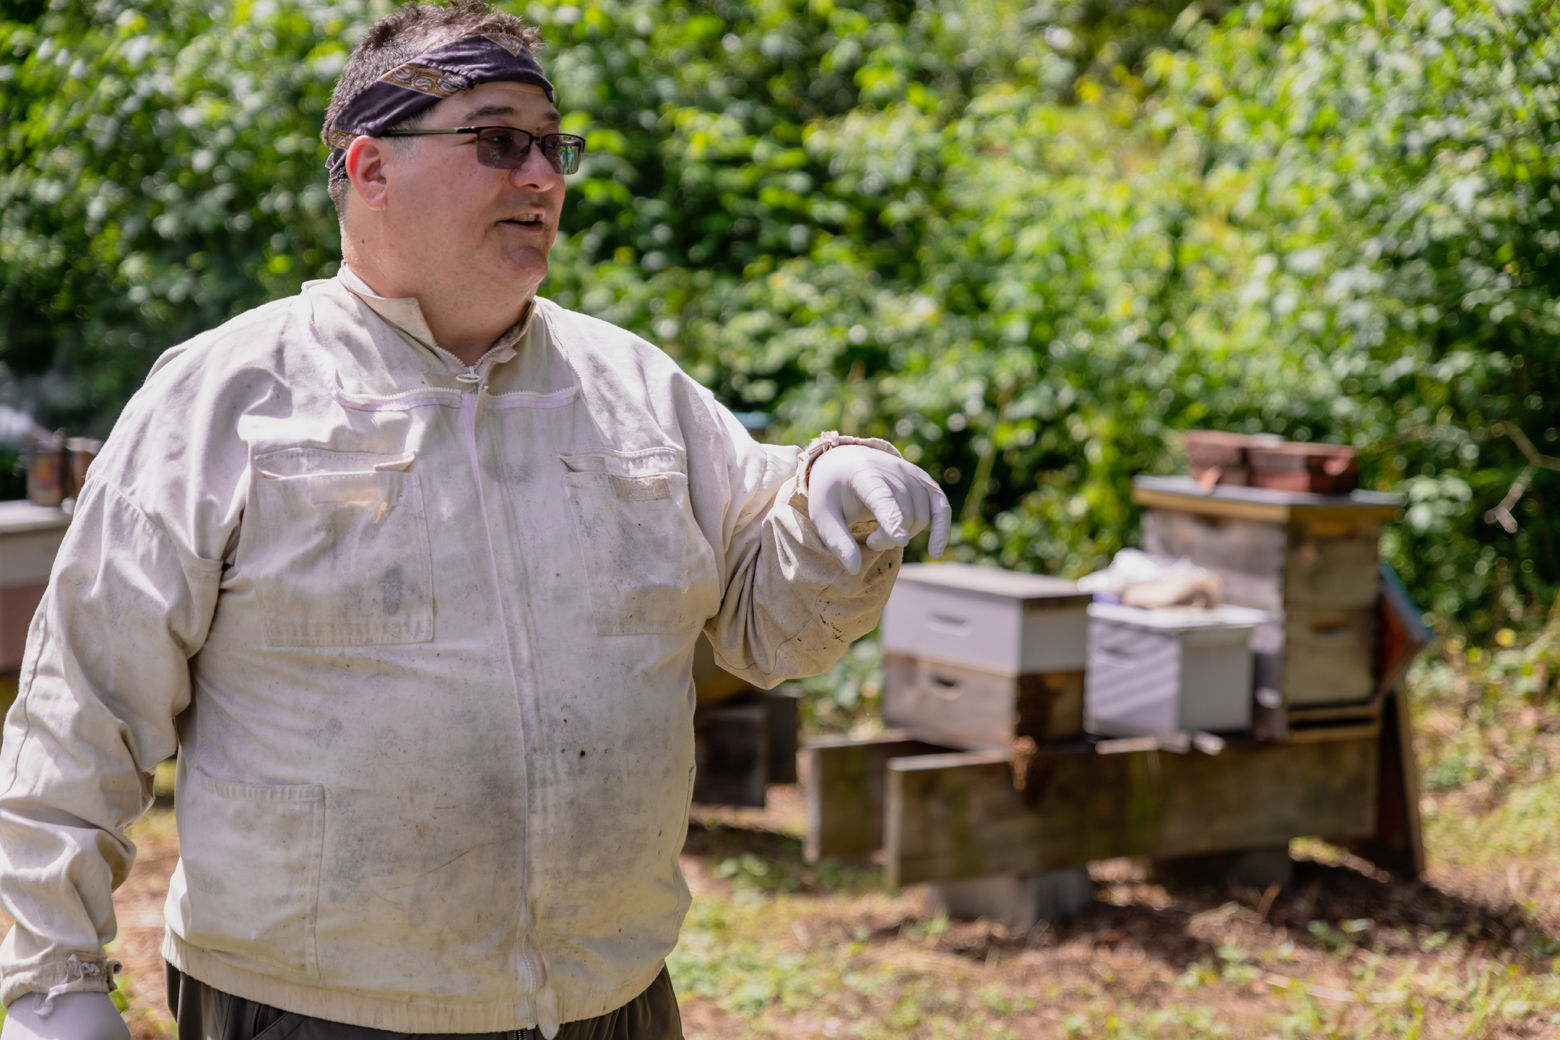 John Ferree started working with bees as a boy, but had to re-learn the hobby as an adult. He doesn't mind being stung once in a while. (Courtesy Accor Hotels)